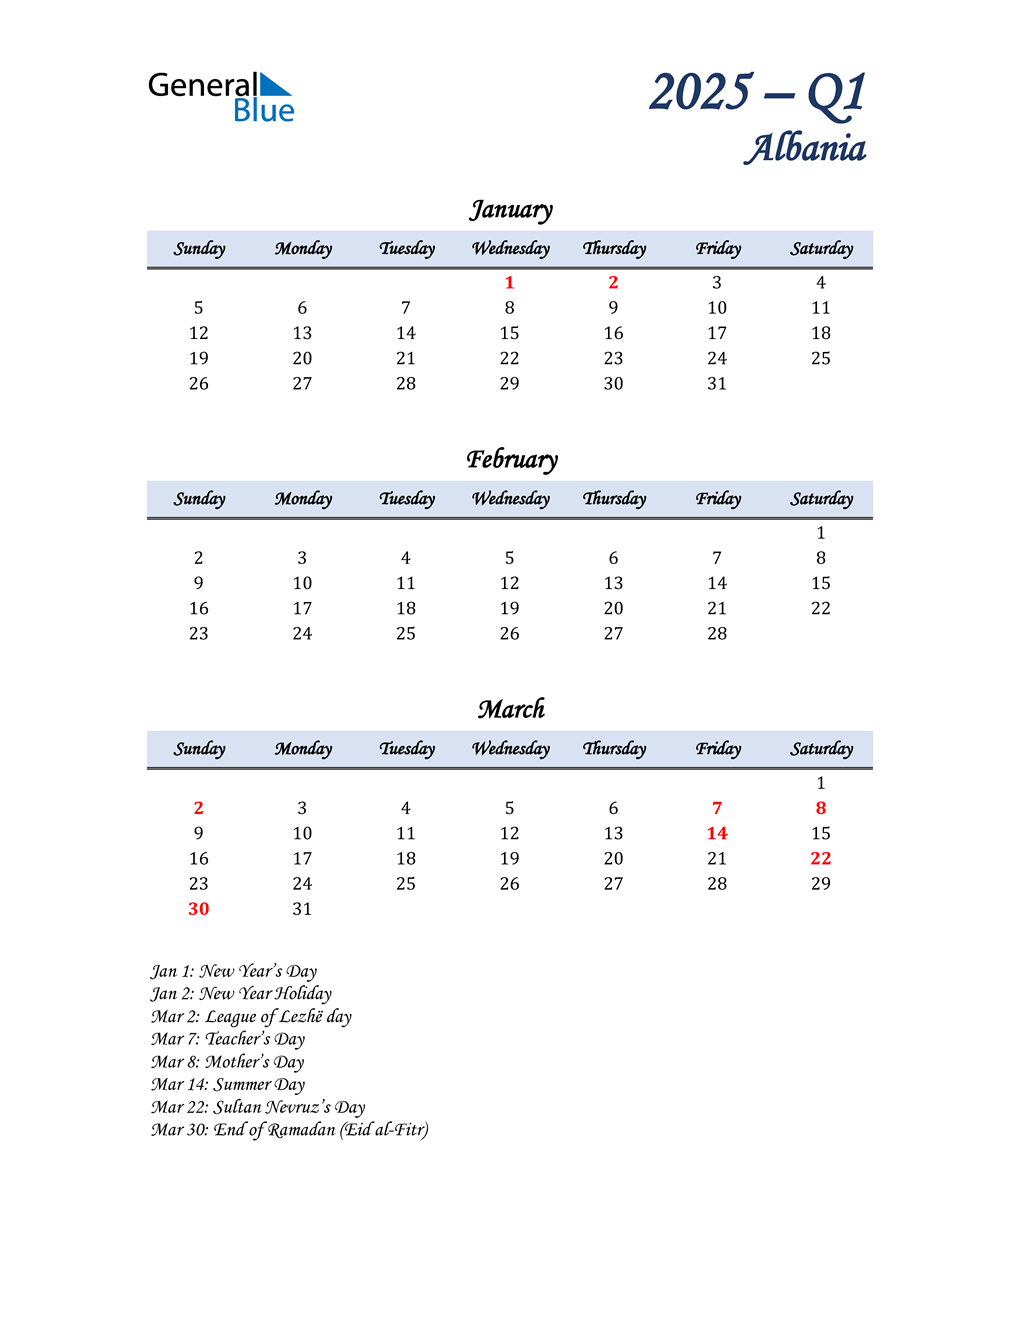  January, February, and March Calendar for Albania